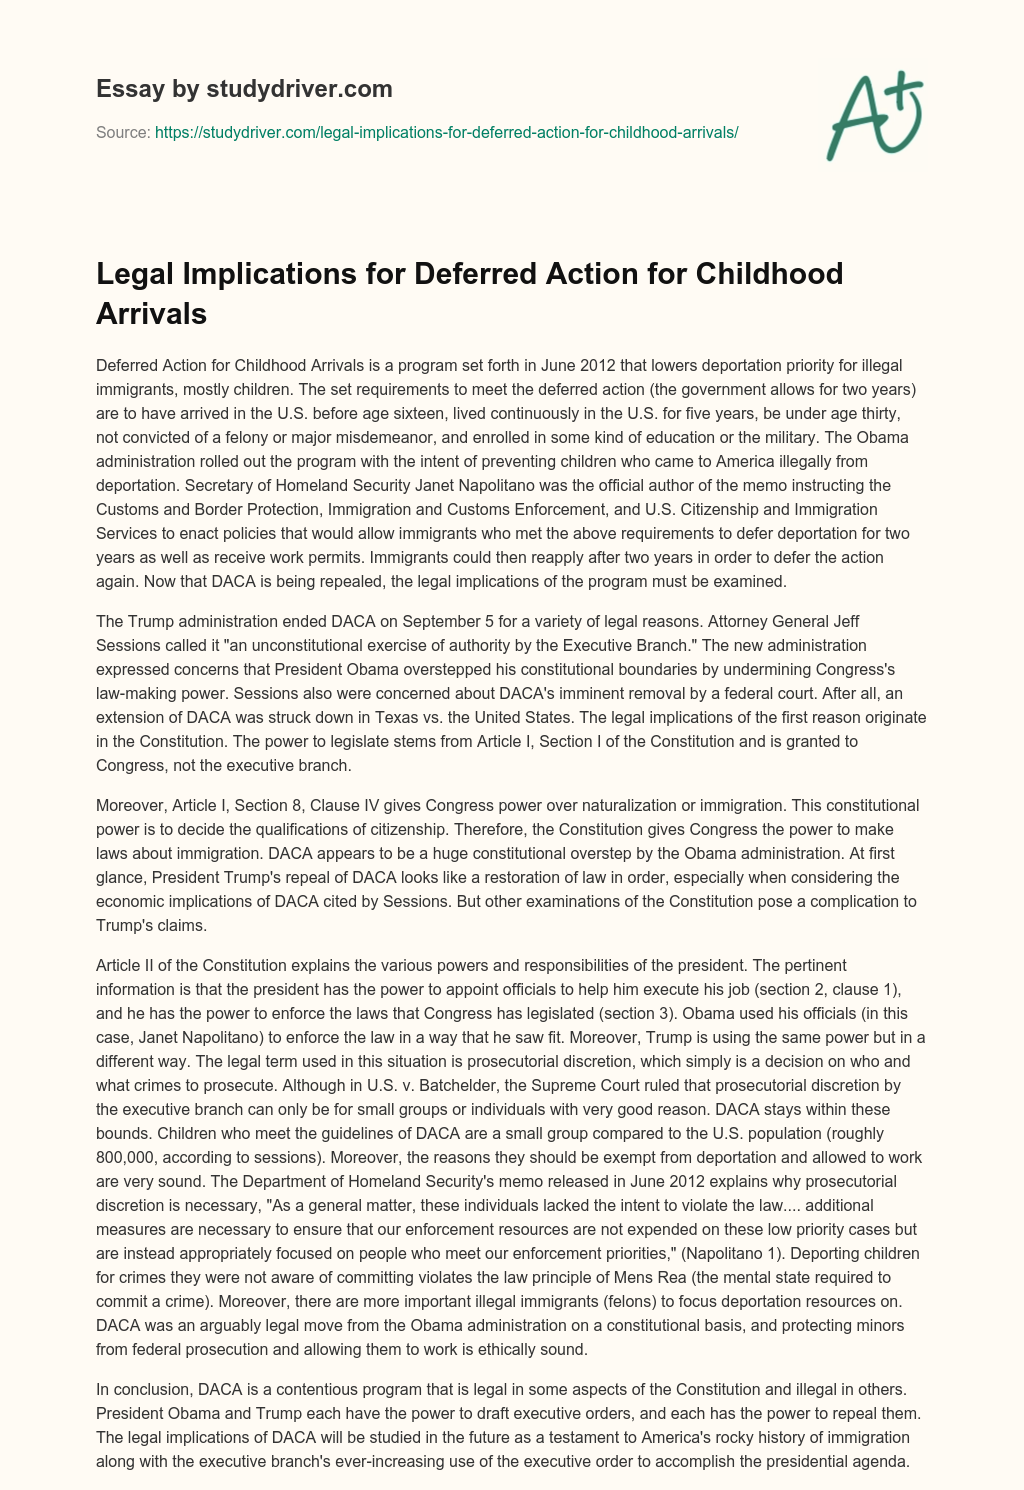 Legal Implications for Deferred Action for Childhood Arrivals essay